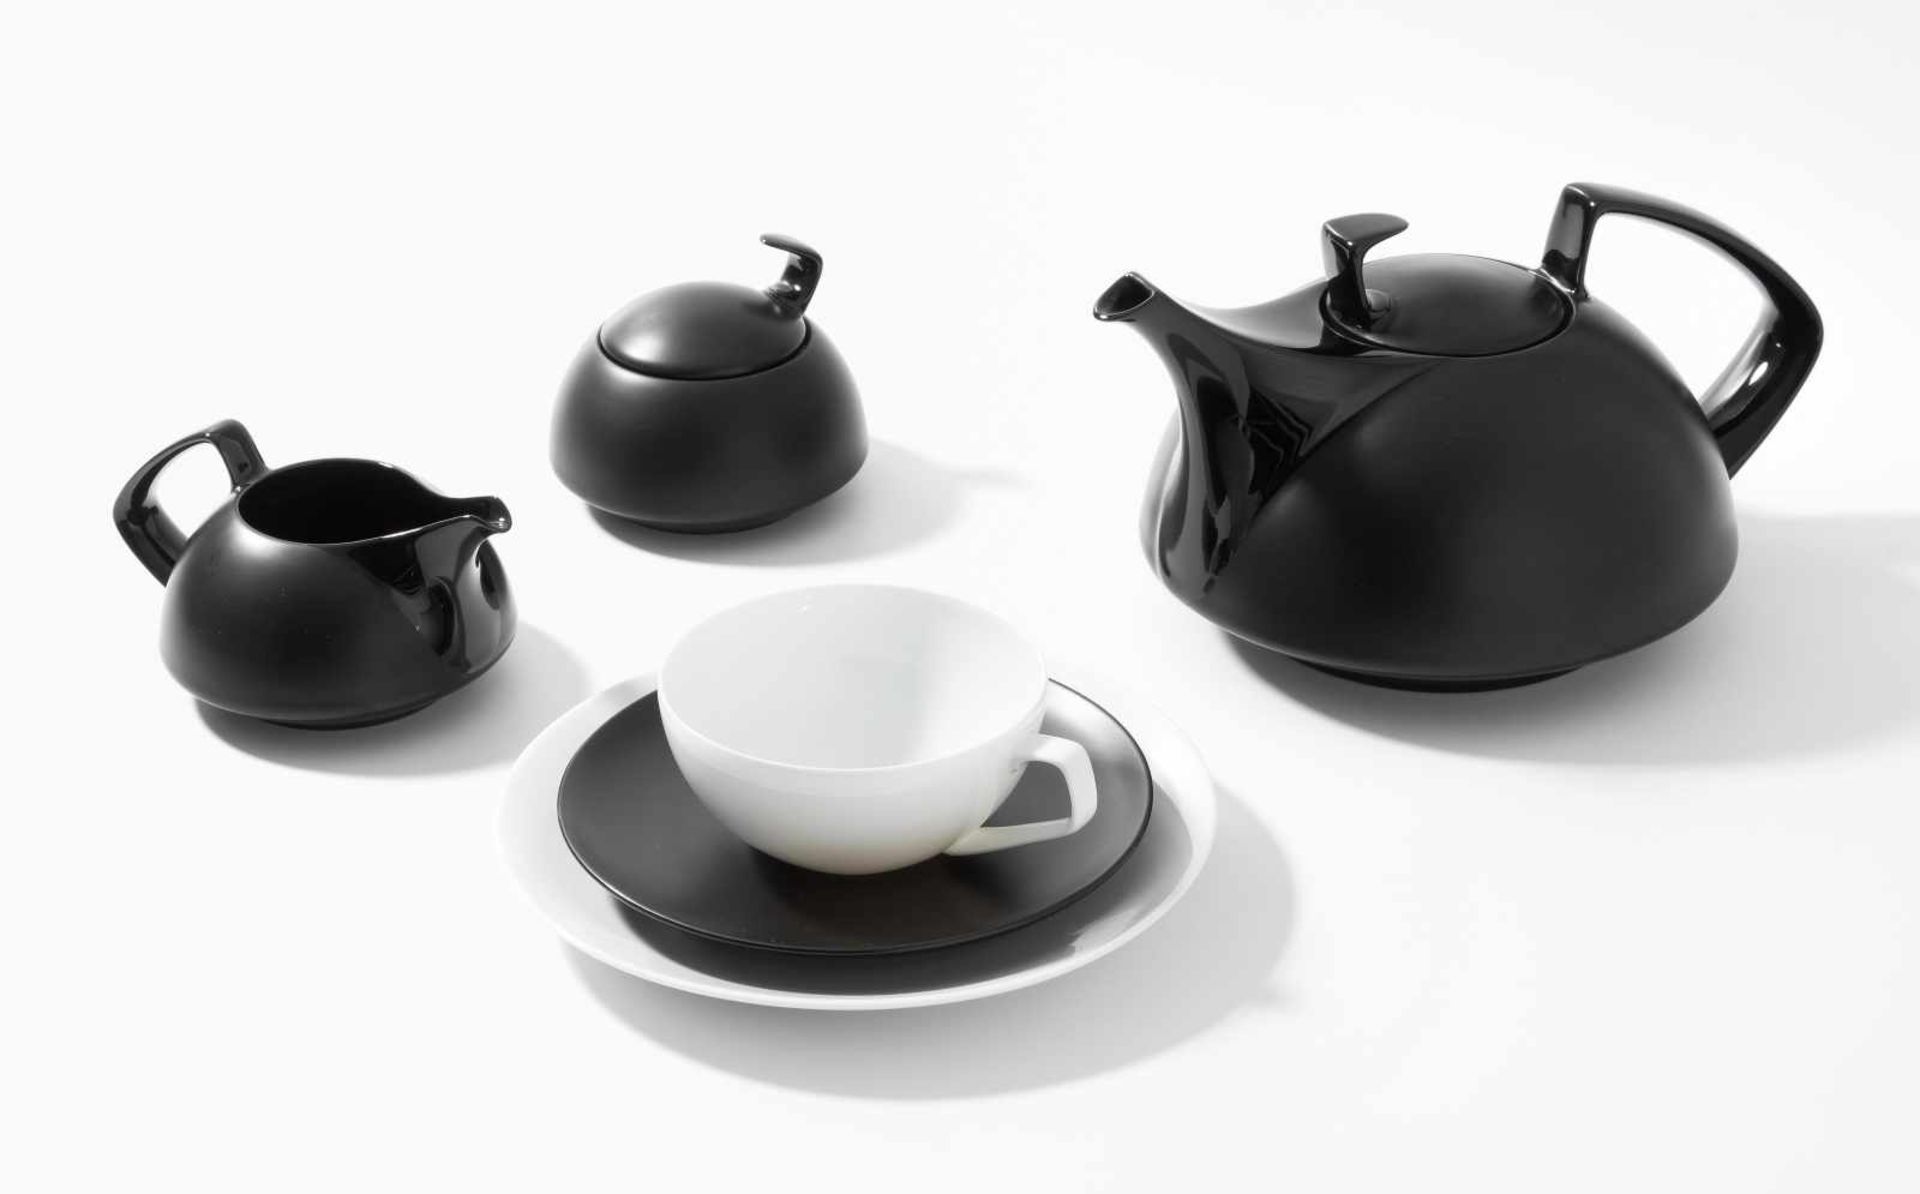 Rosenthal*Teeservice "TAC". Entwurf: The Architects Collaborative/Walter Gropius, Louis McMillen.